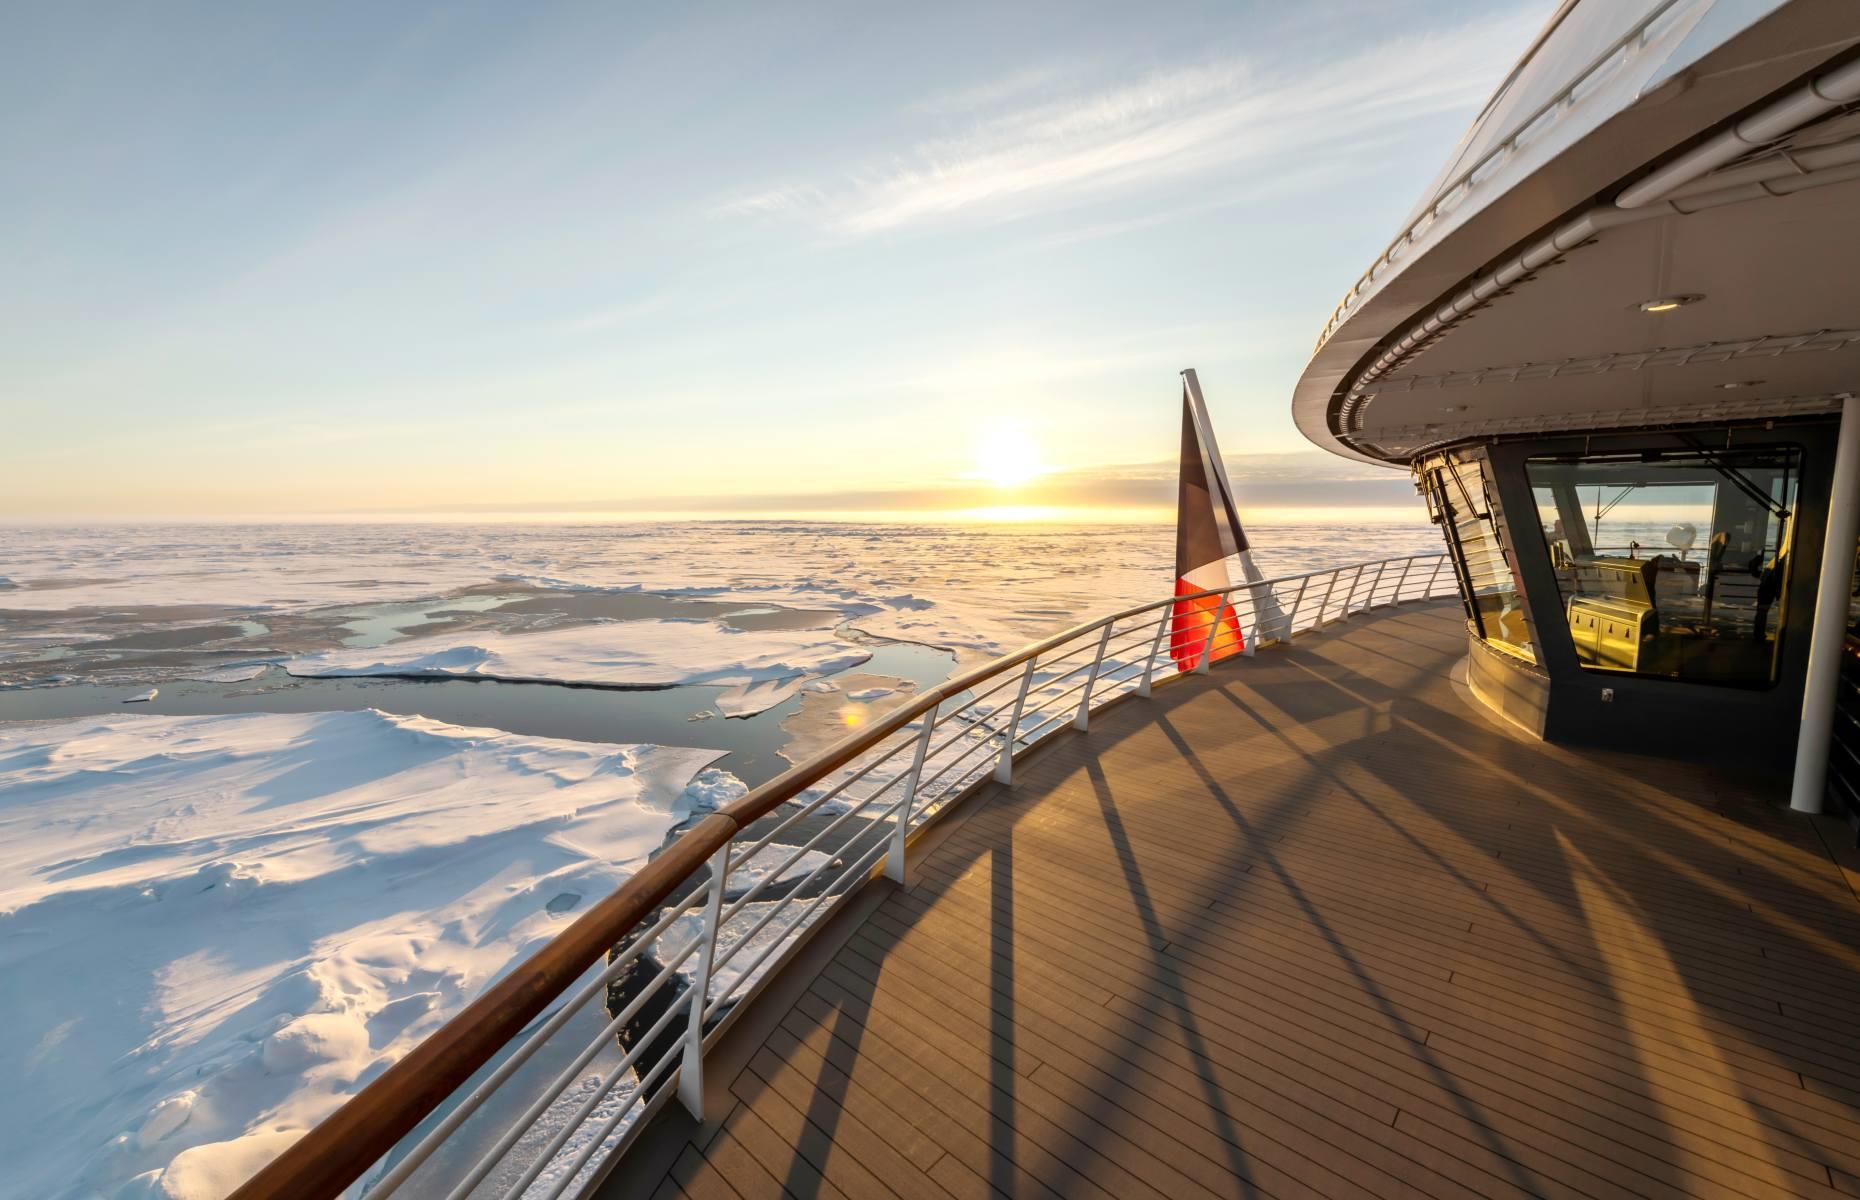 Wondering what it’s like to sail on the most opulent cruise ships, be waited on by butlers, and sleep under 3,000-thread count sheets in suites designed by Ralph Lauren? Well, wonder no more – we’ve got the lowdown on the world’s most luxurious sailings, whether it’s expedition ship-based explorations of the Arctic or Champagne-soaked floats around the Caribbean.